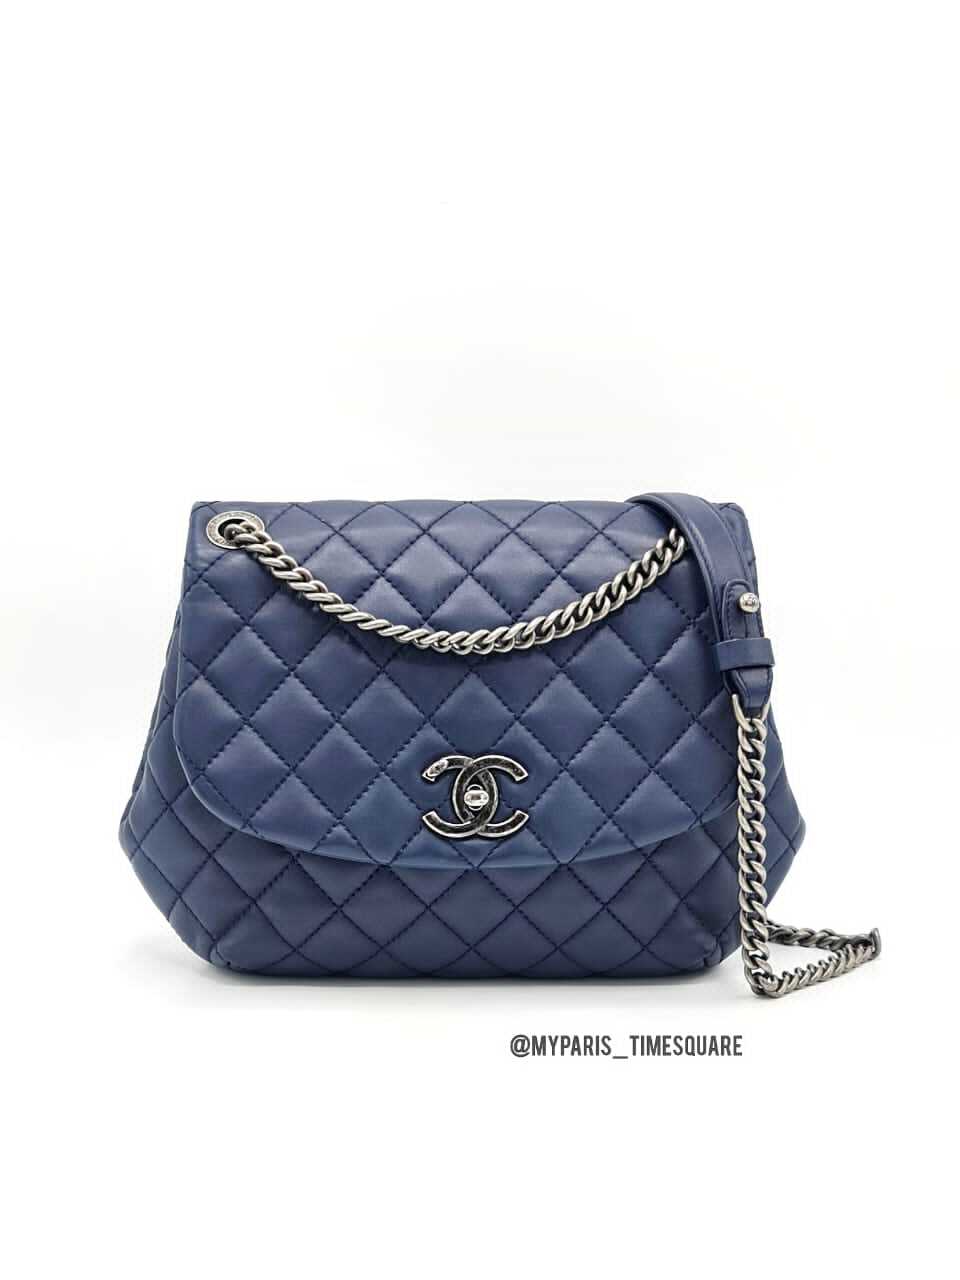 What is the name of this particular bag  rchanel